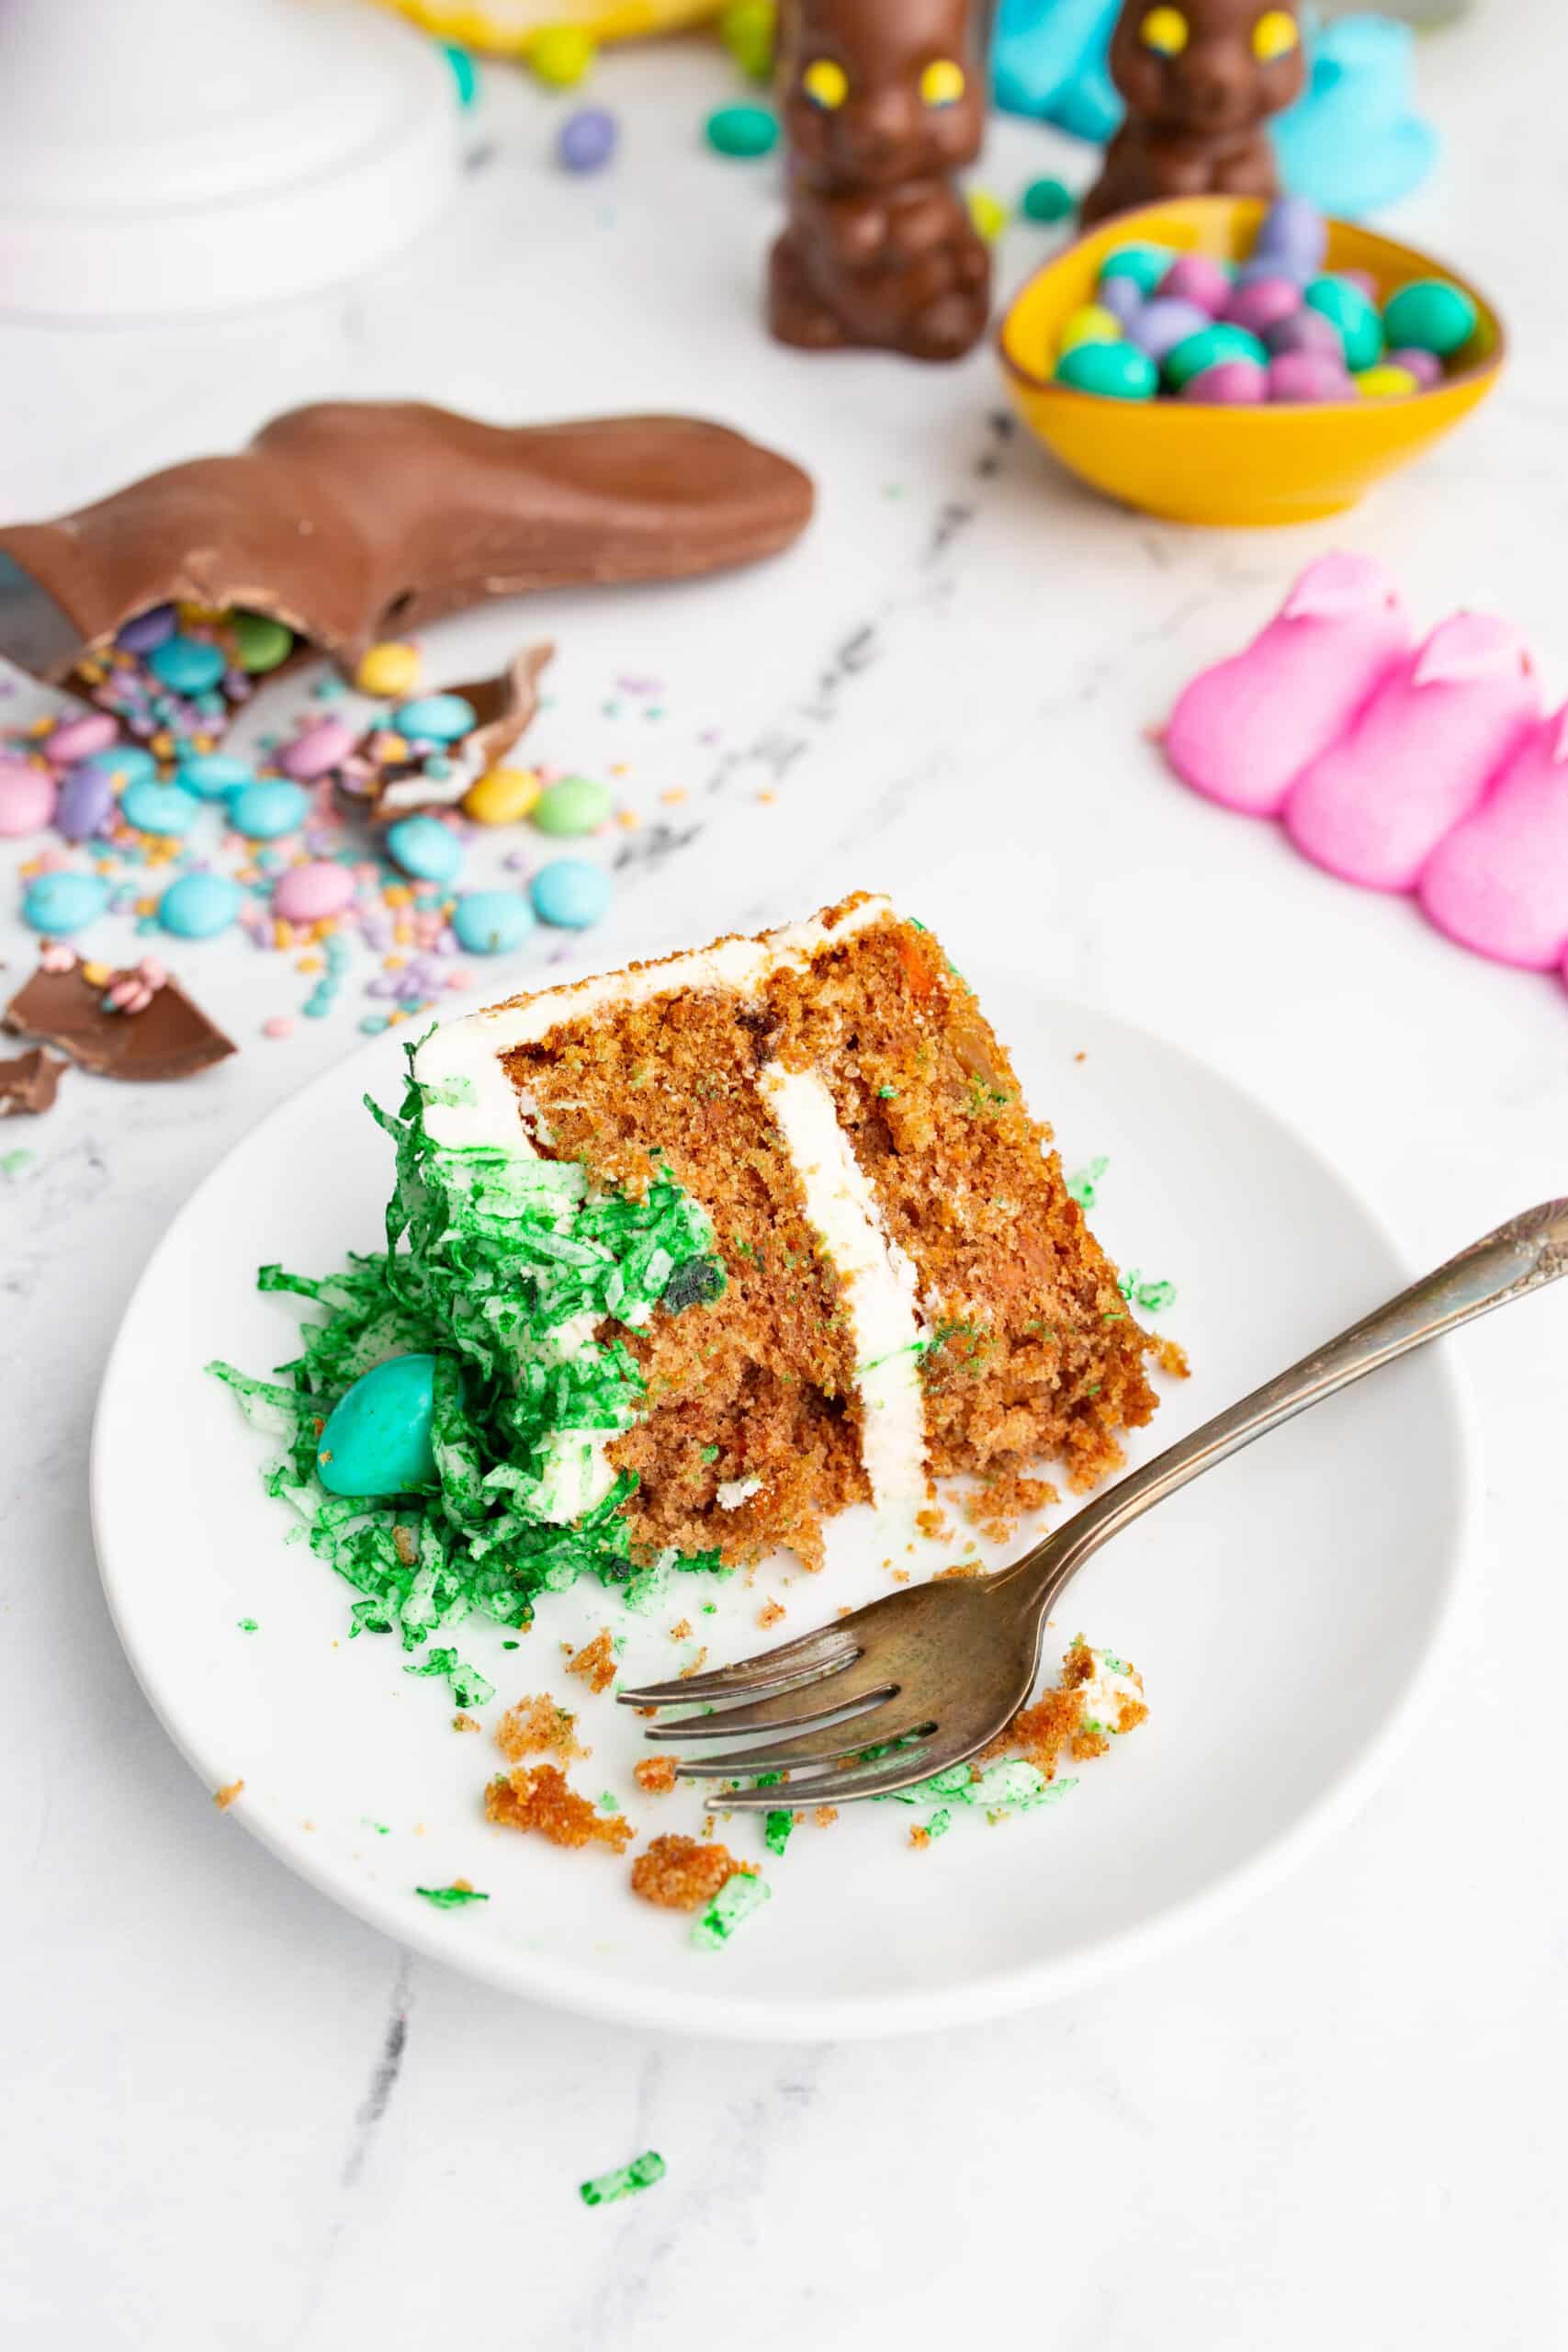 What To Do with Chocolate Bunnies: Easy Easter Bunny Cake Topper